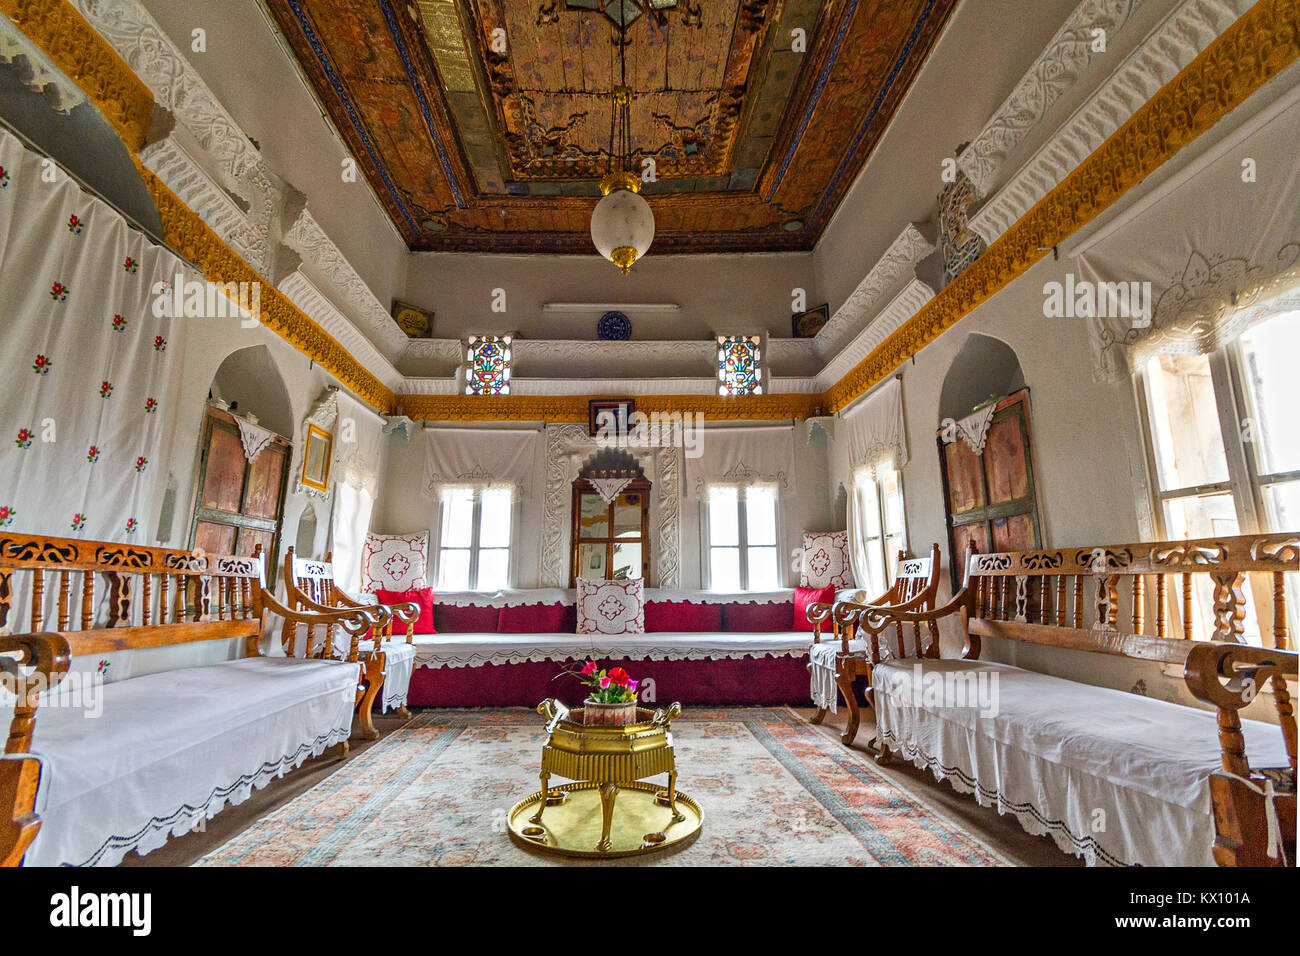 Interior of a traditional house in the town of Savur near Mardin, Turkey. Stock Photo